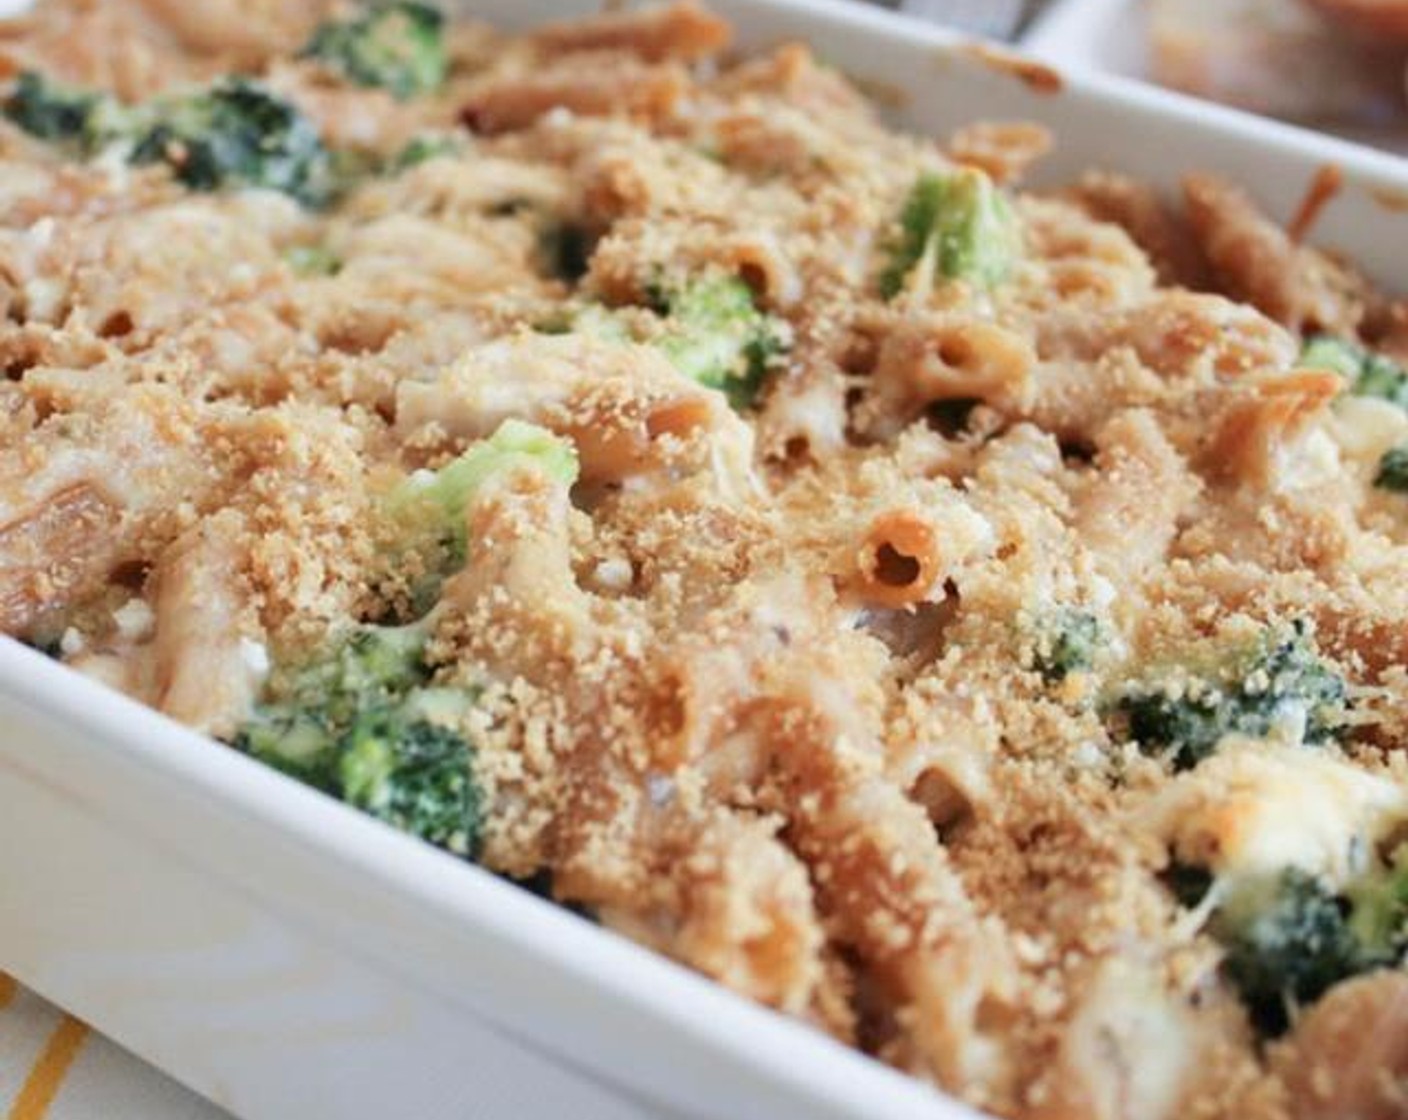 Cheesy Baked Penne with Chicken and Broccoli